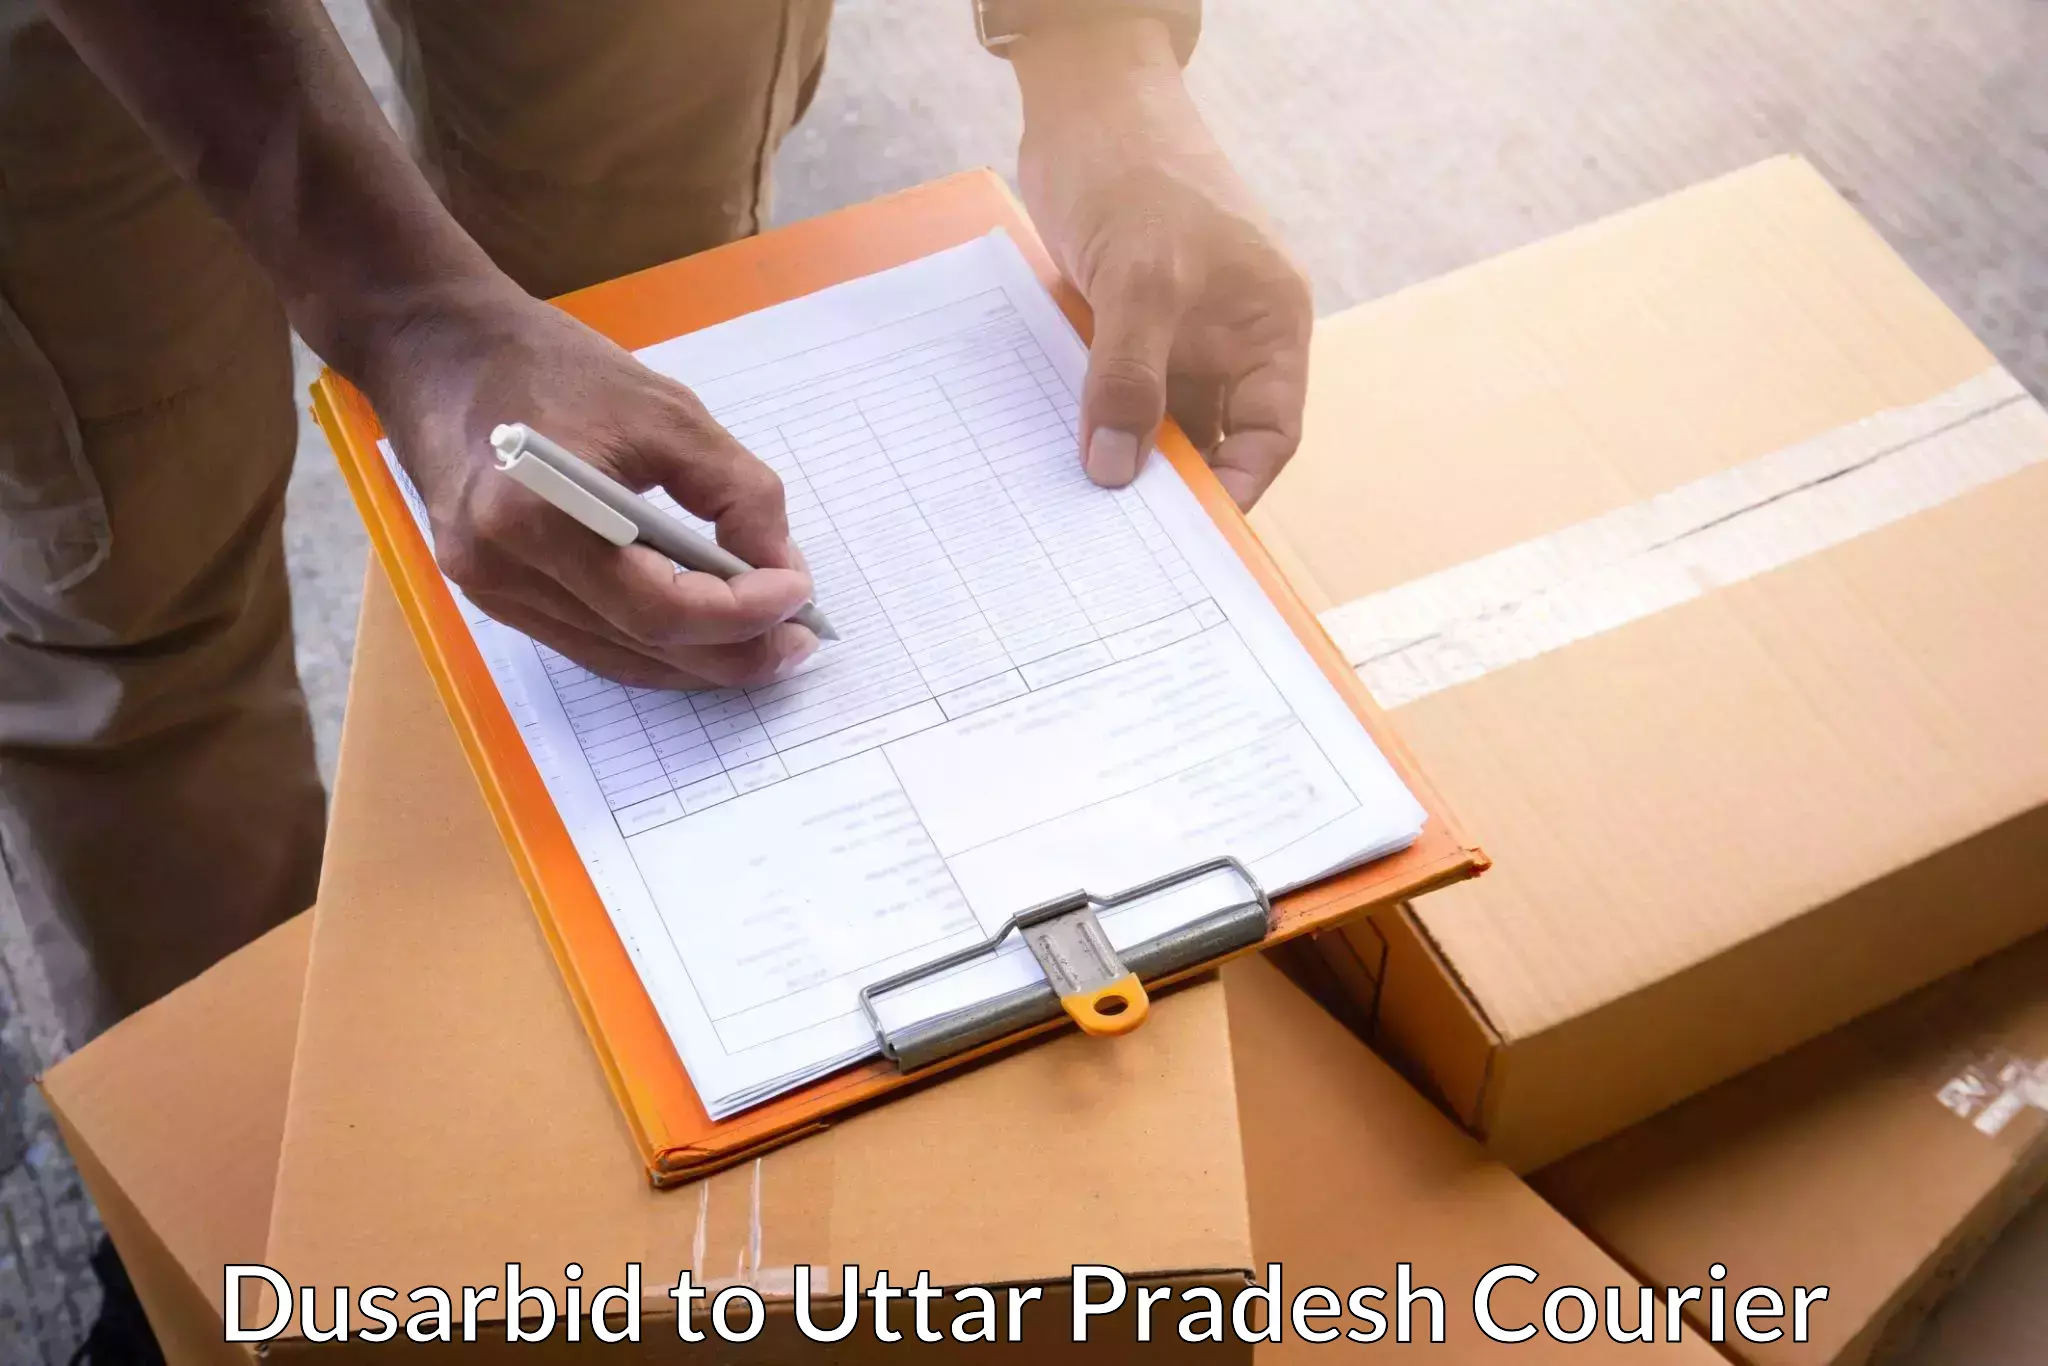 Courier service partnerships Dusarbid to Khutar